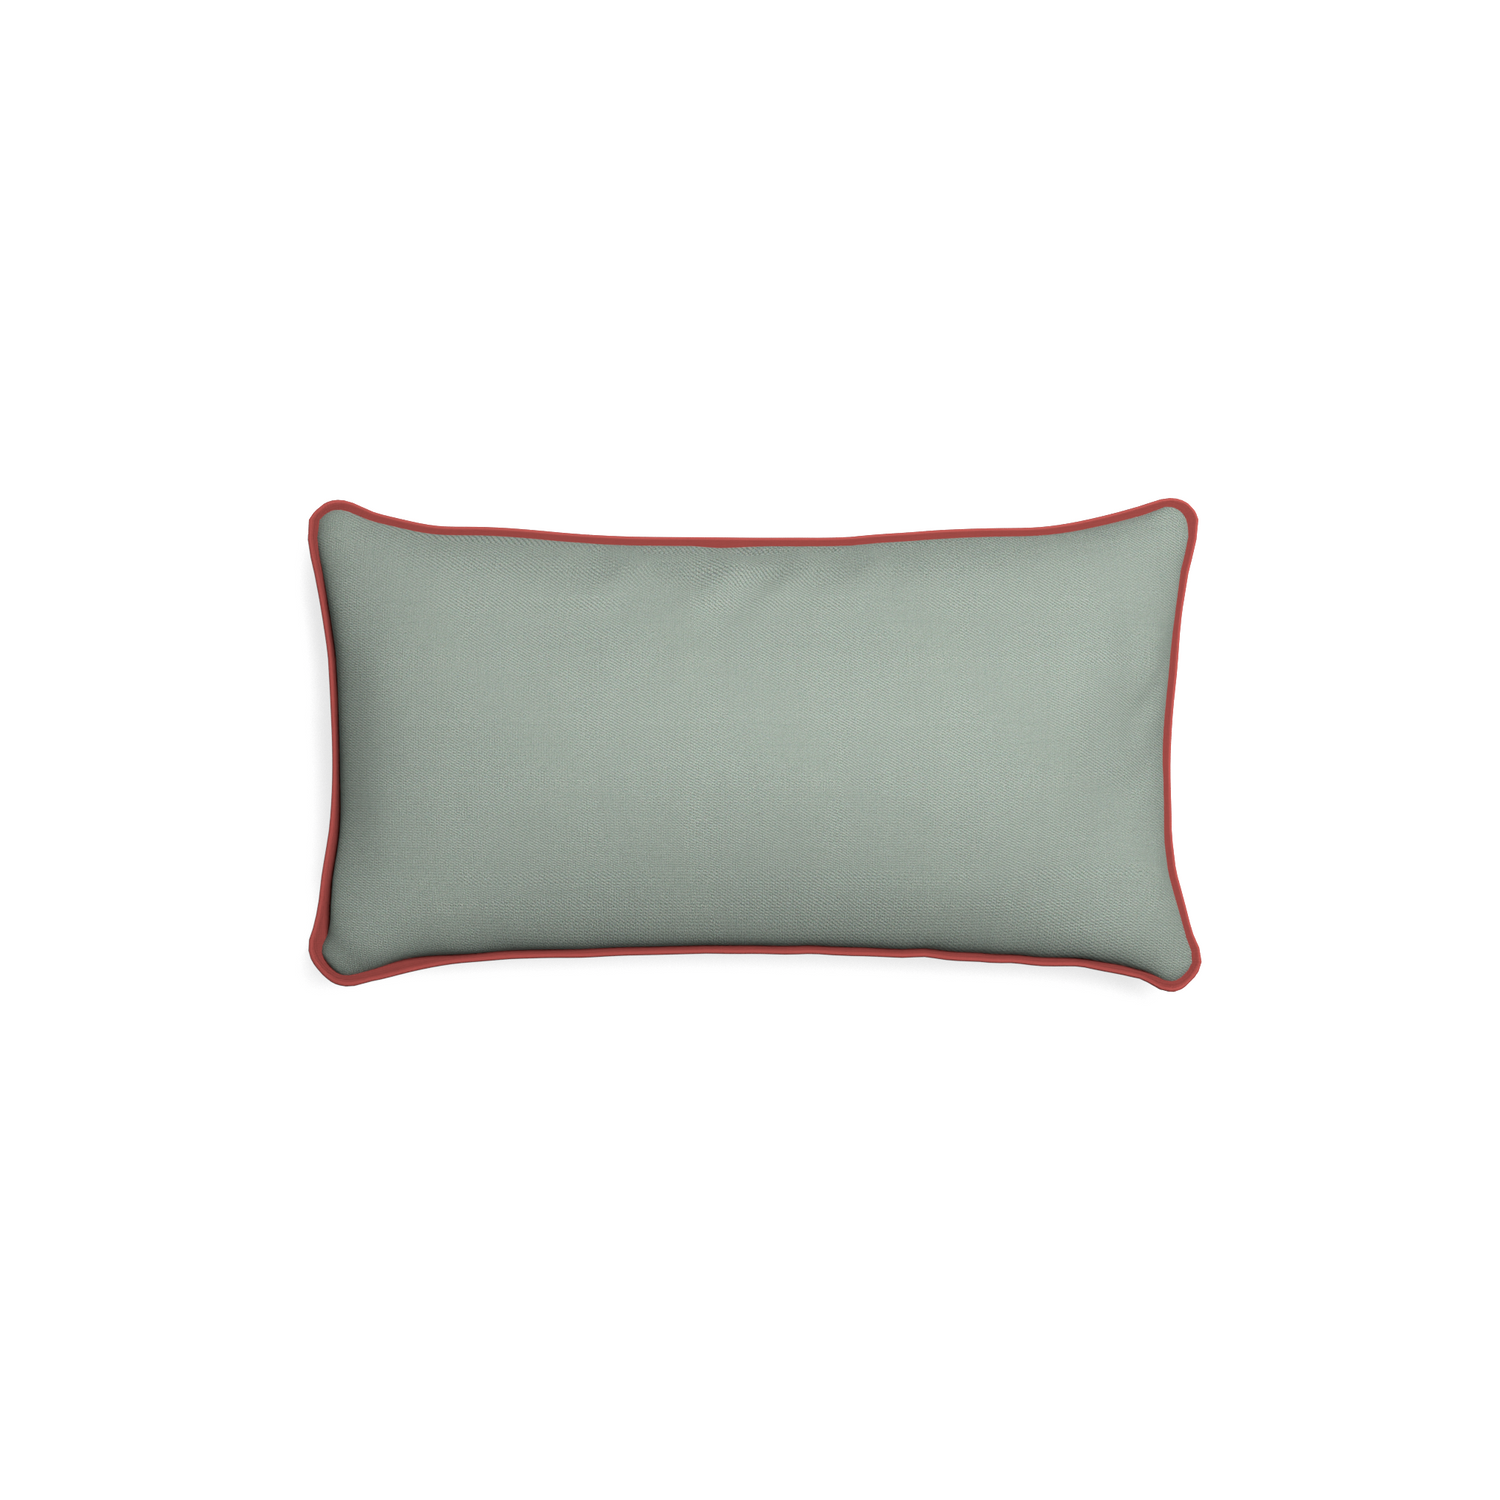 Xl-lumbar sage custom pillow with c piping on white background